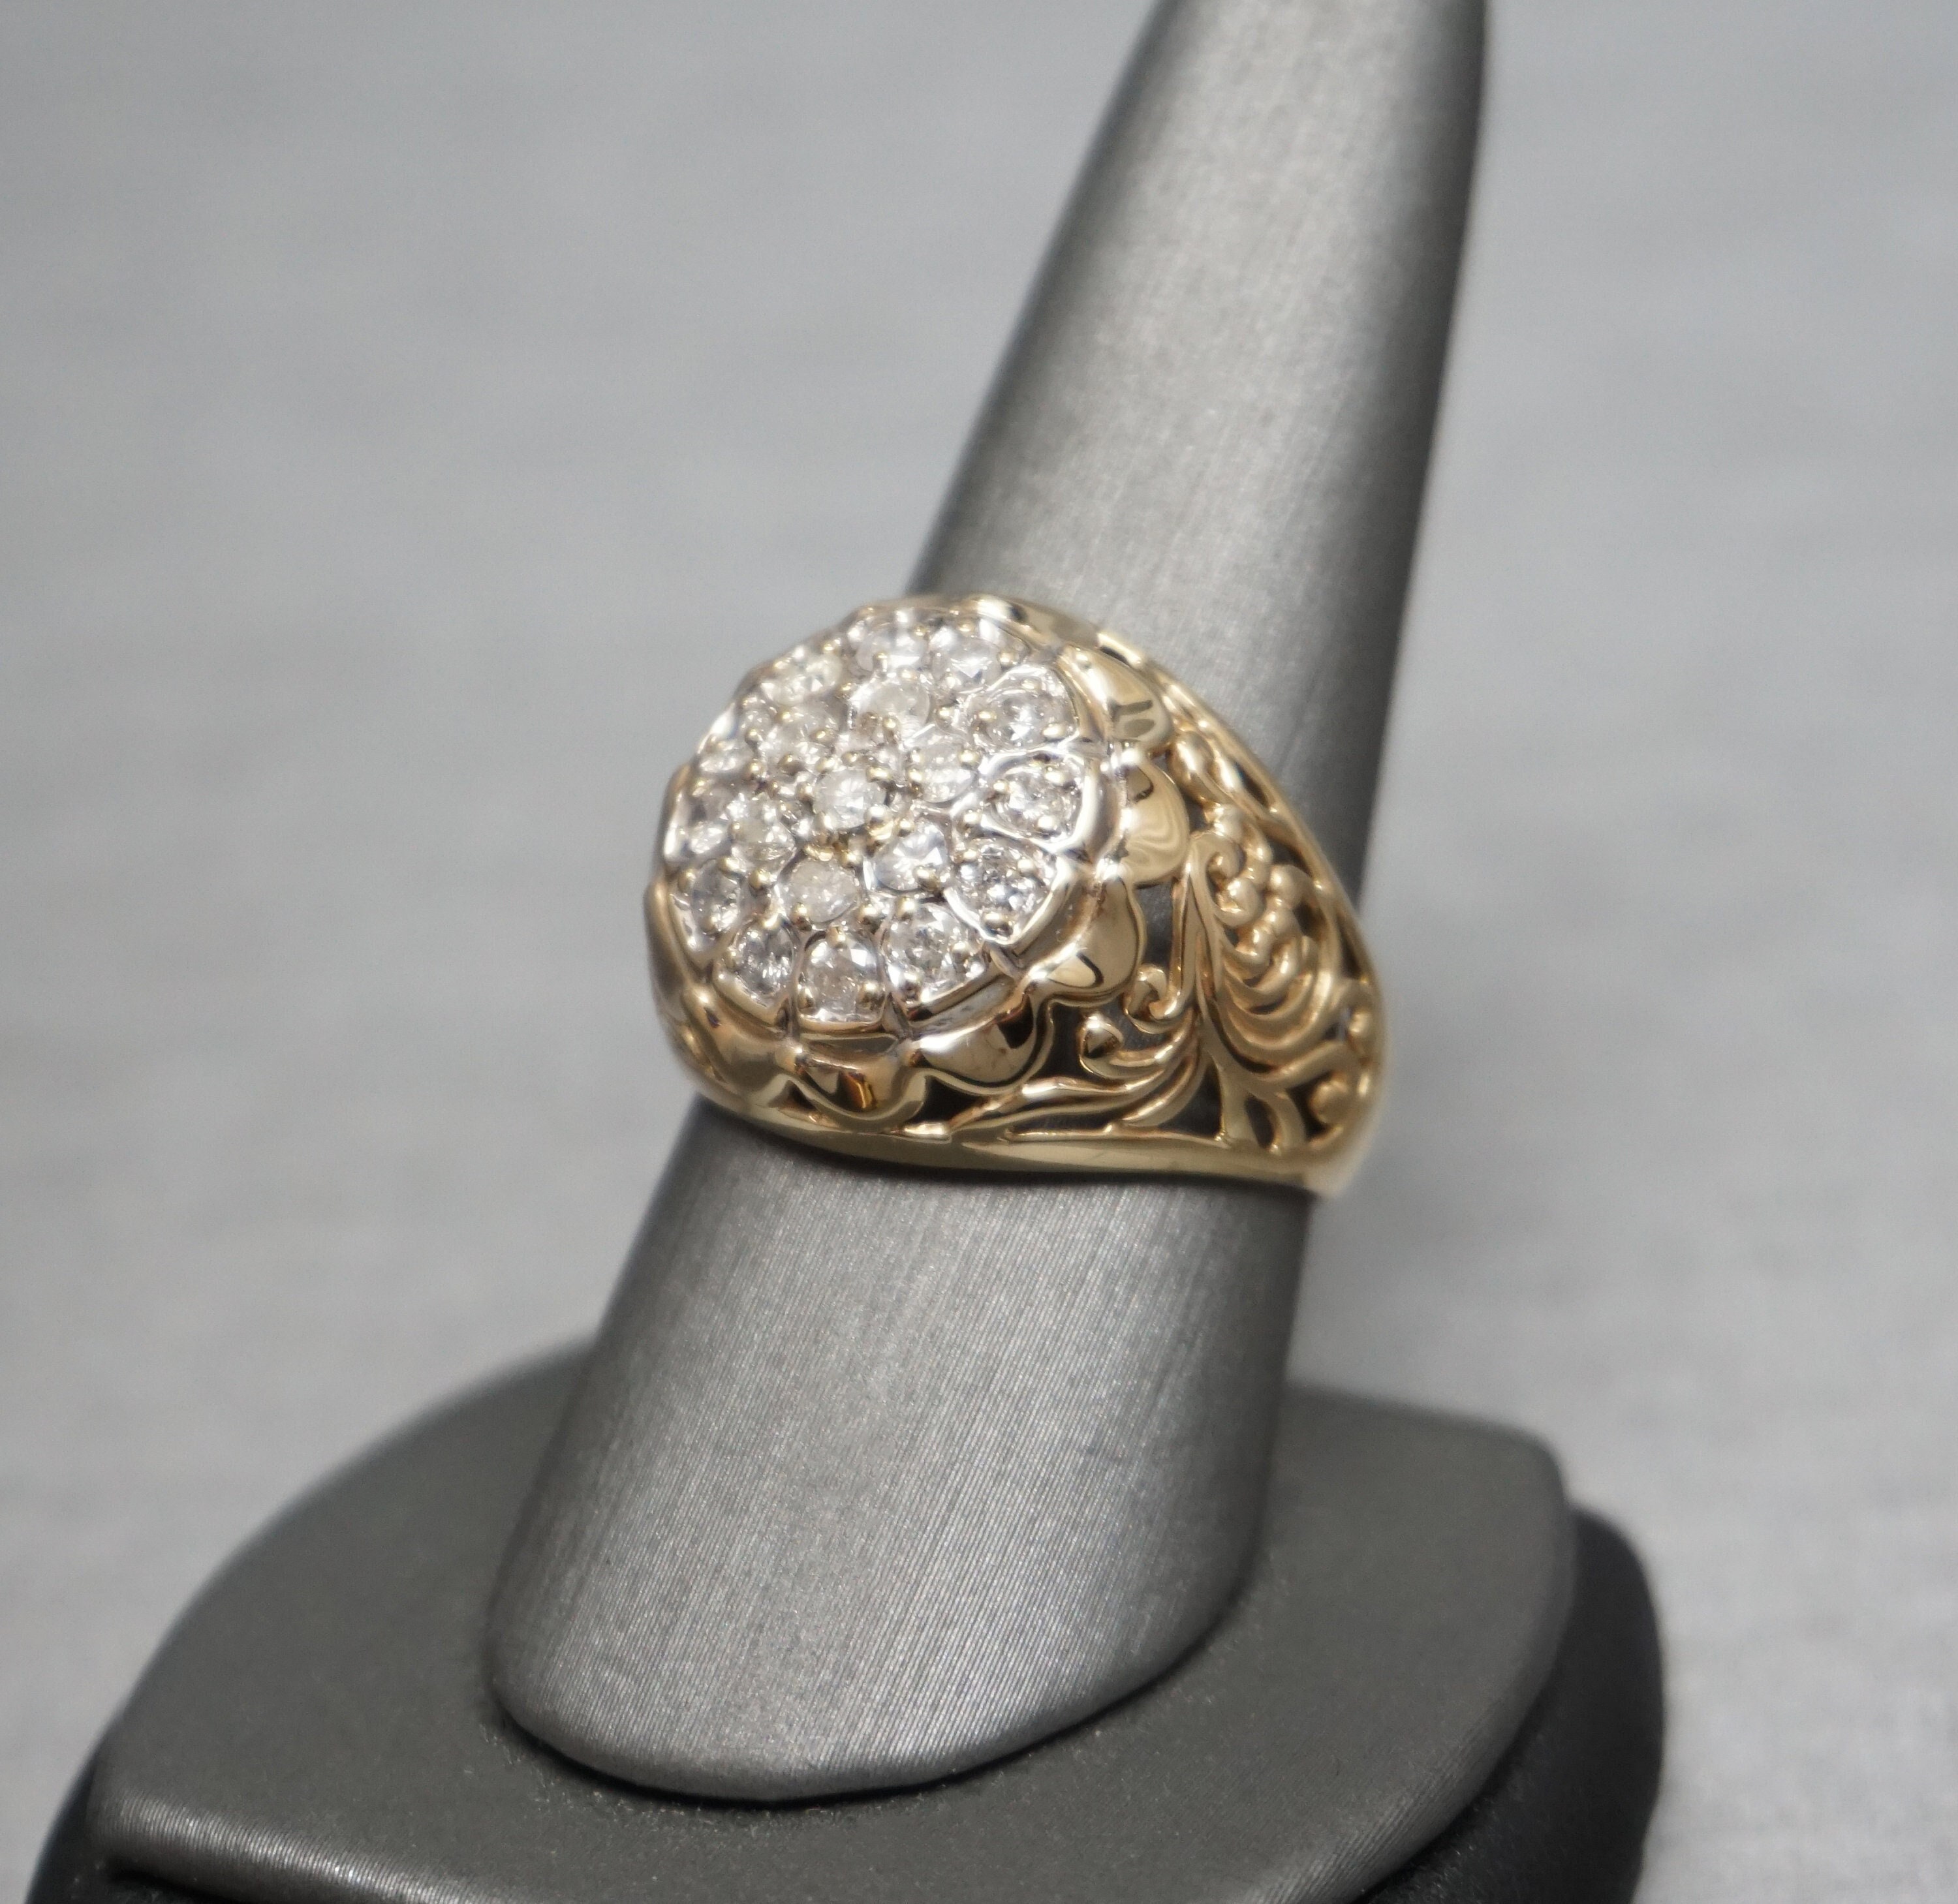 VINTAGE 1980'S CIRCA 14KT YELLOW GOLD ROUND AND BAGUETTE CUT DIAMOND E